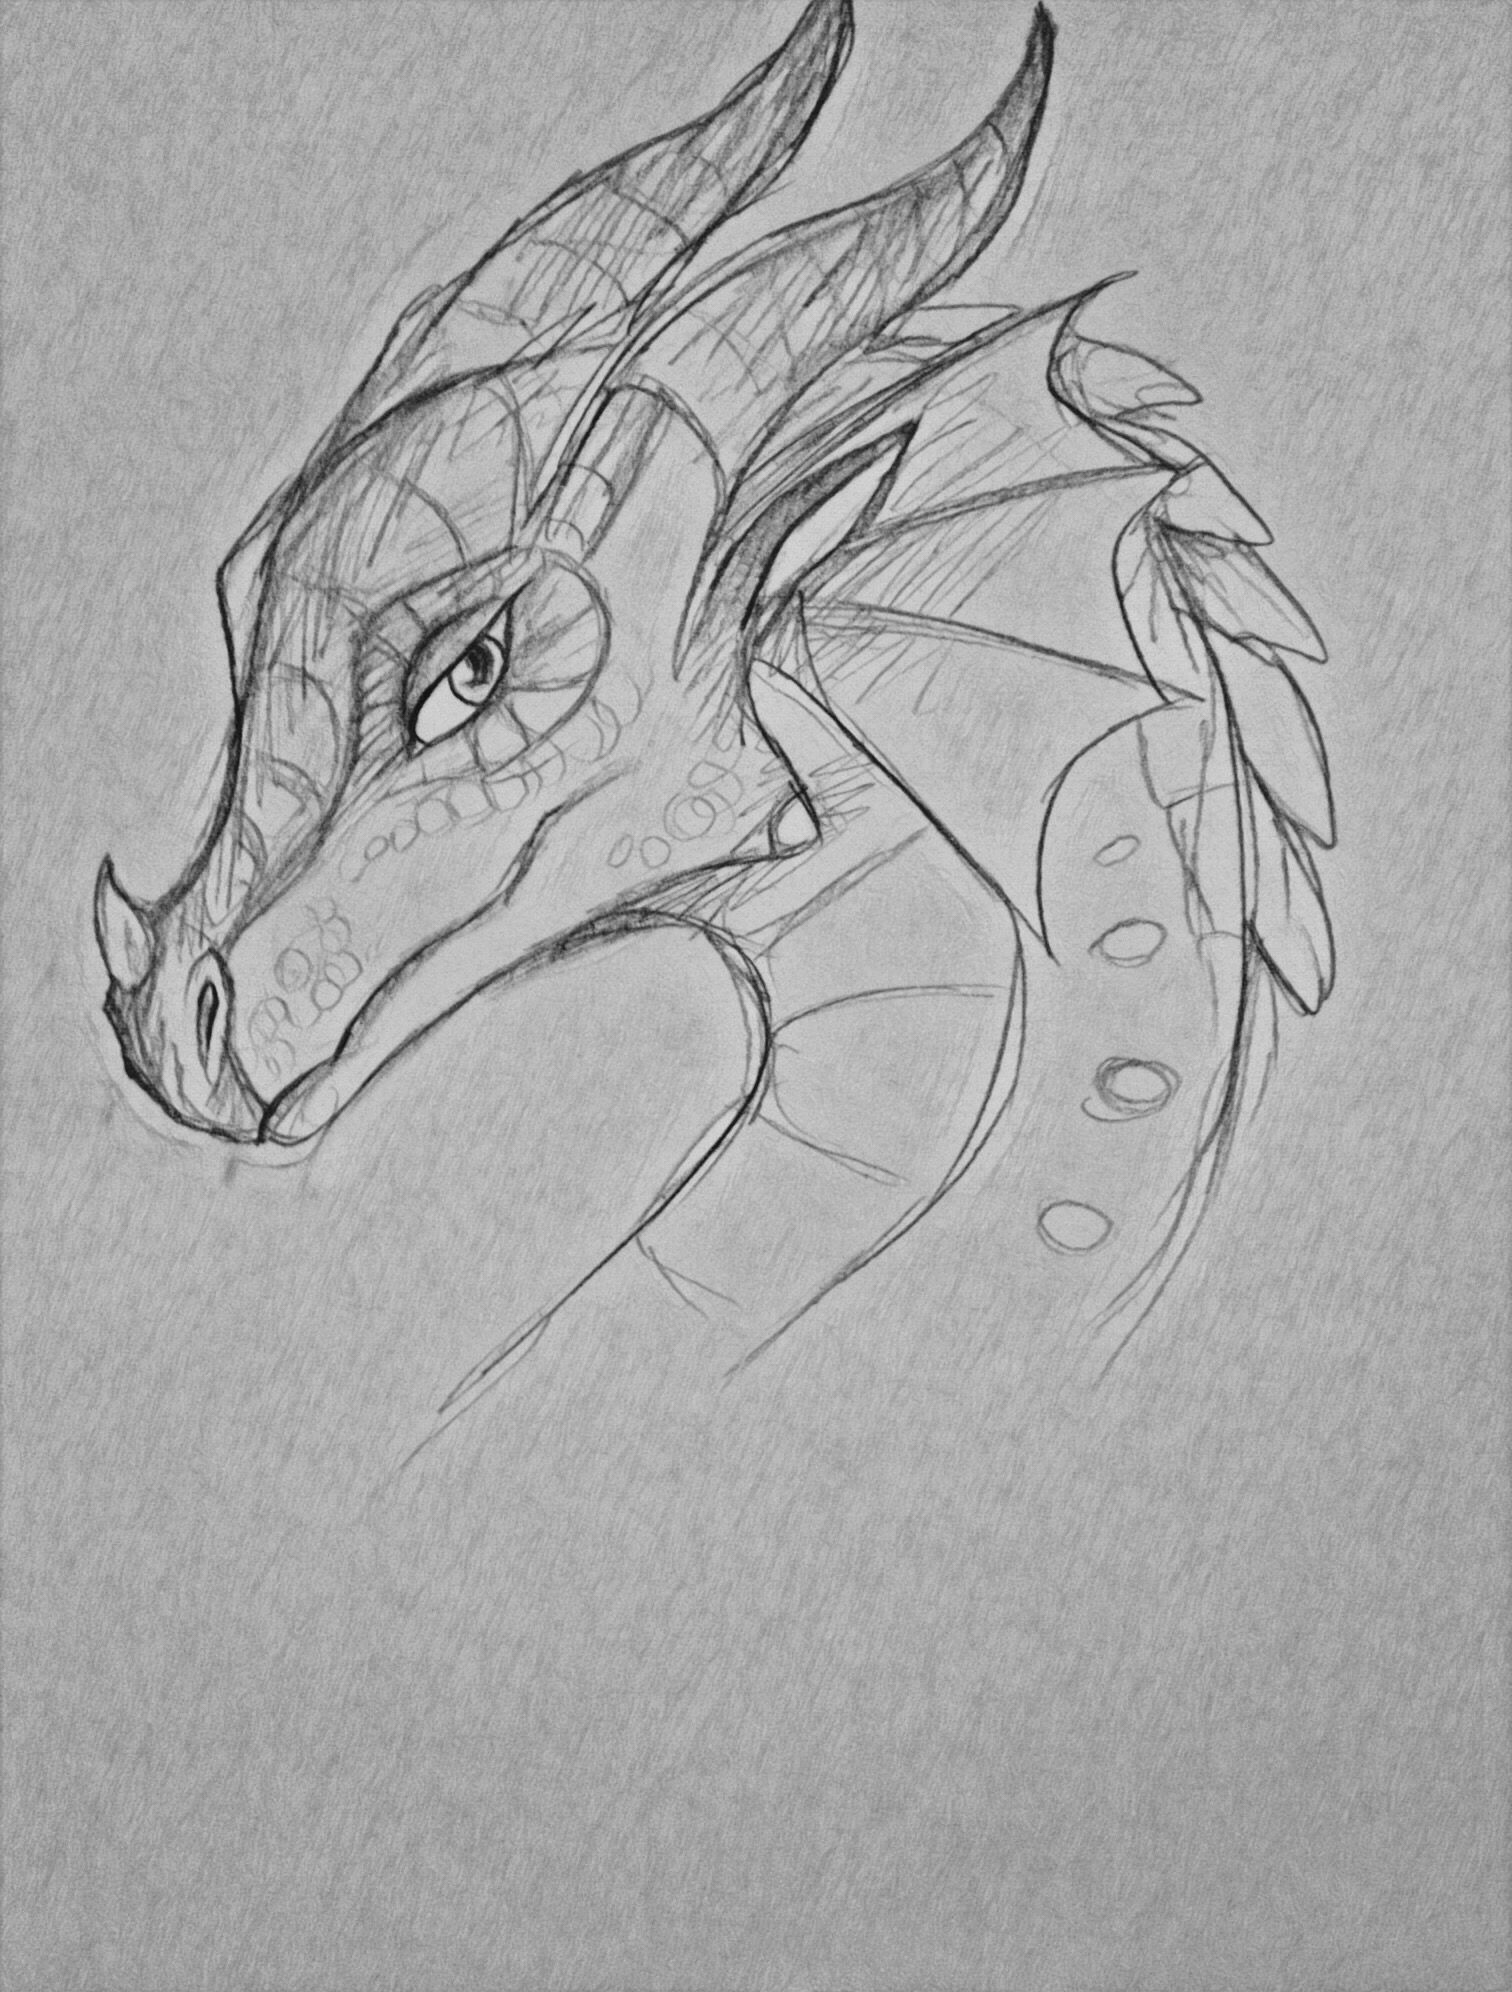 31+ Drawing Pictures Of Dragons Pics